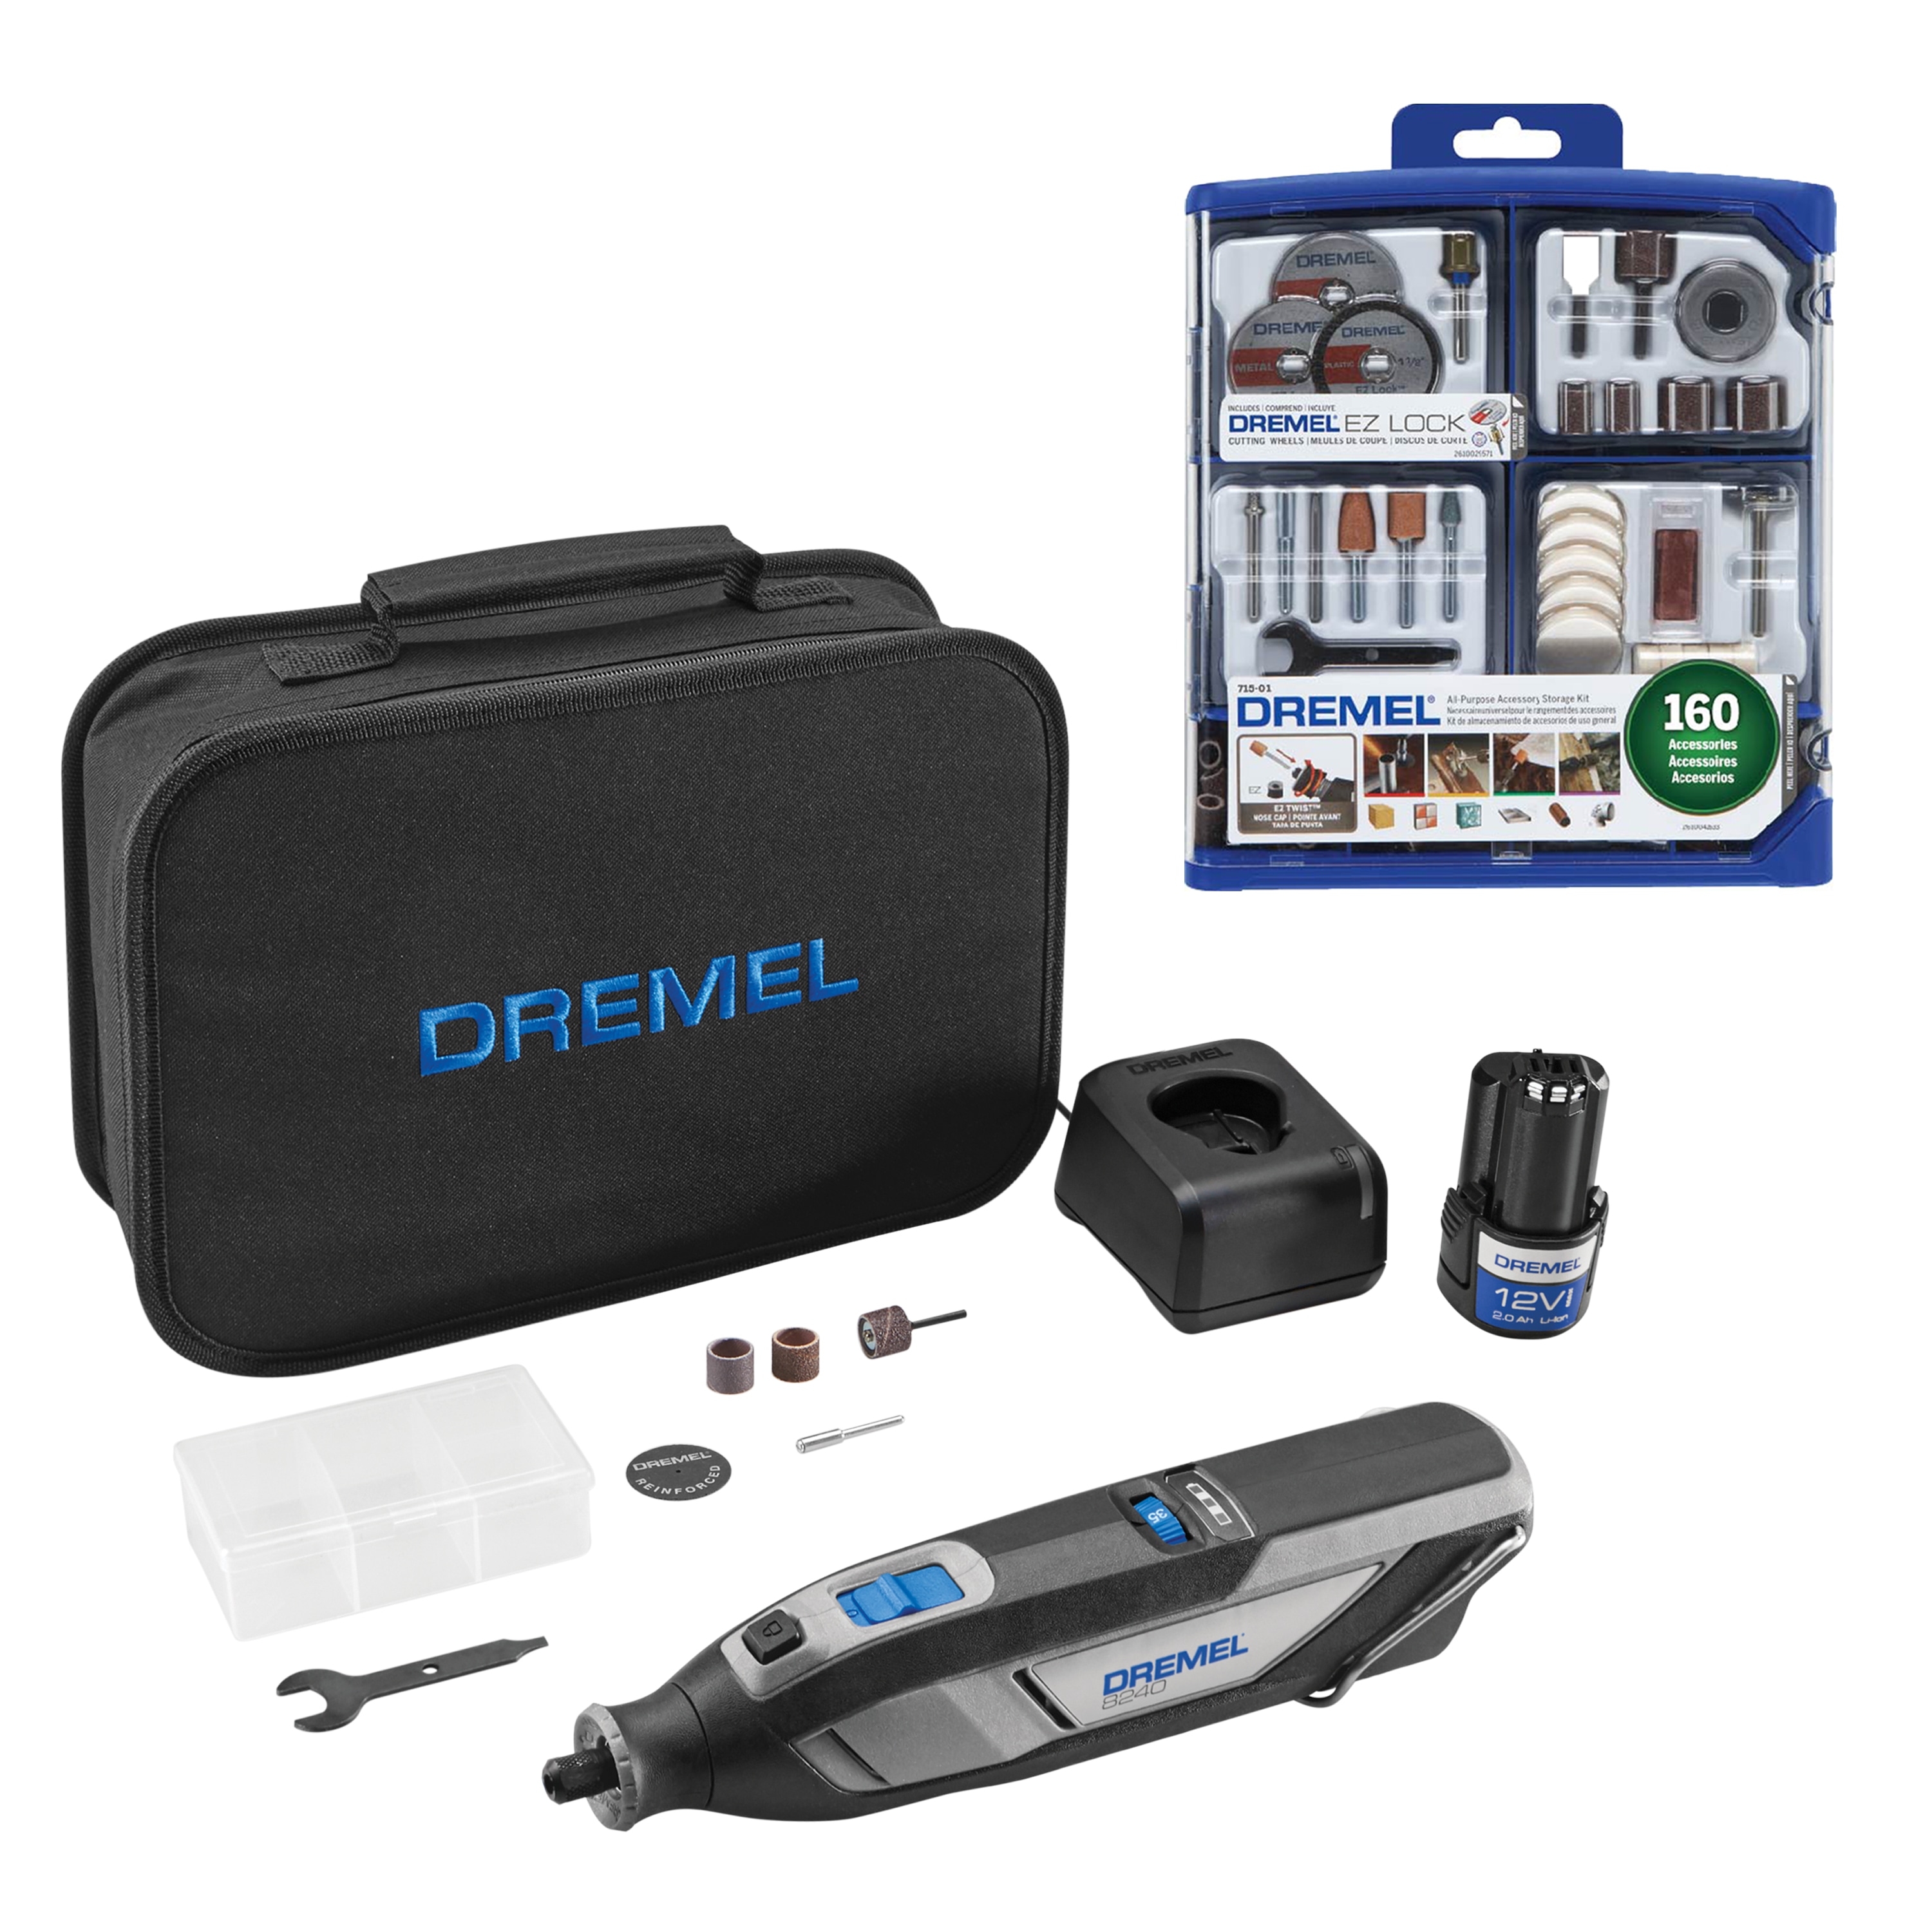 Dremel 8240 Cordless 12V Variable Speed Rotary Tool with 5 Accessories + 160-Piece Accessory Kit